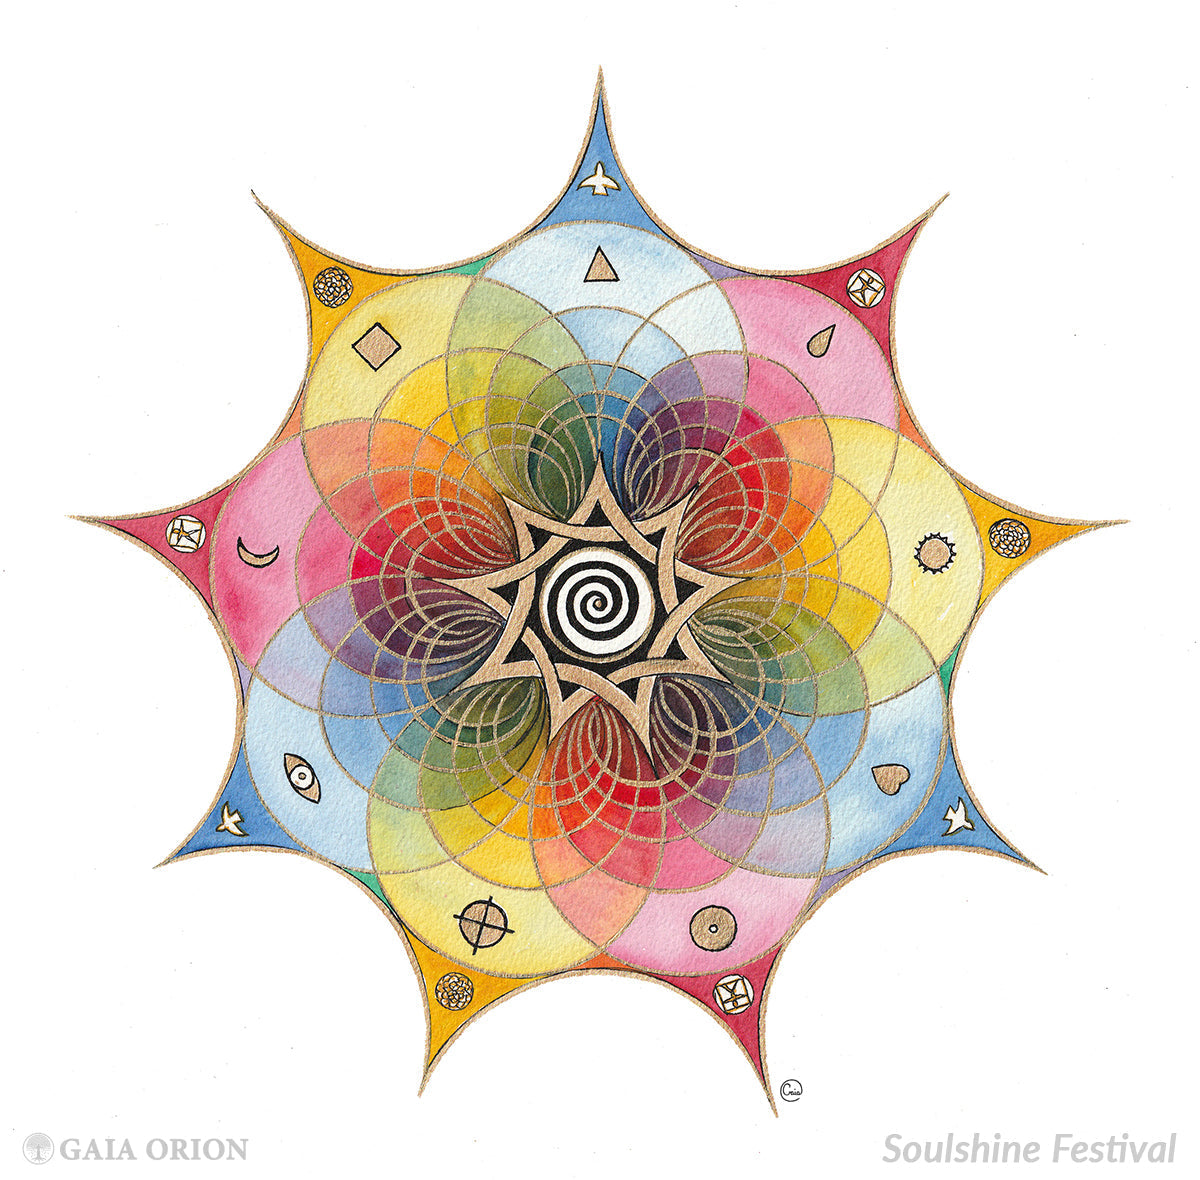 A painting called Soulshine with a 9-pointed star design symbols for harmony between mind body and spirit